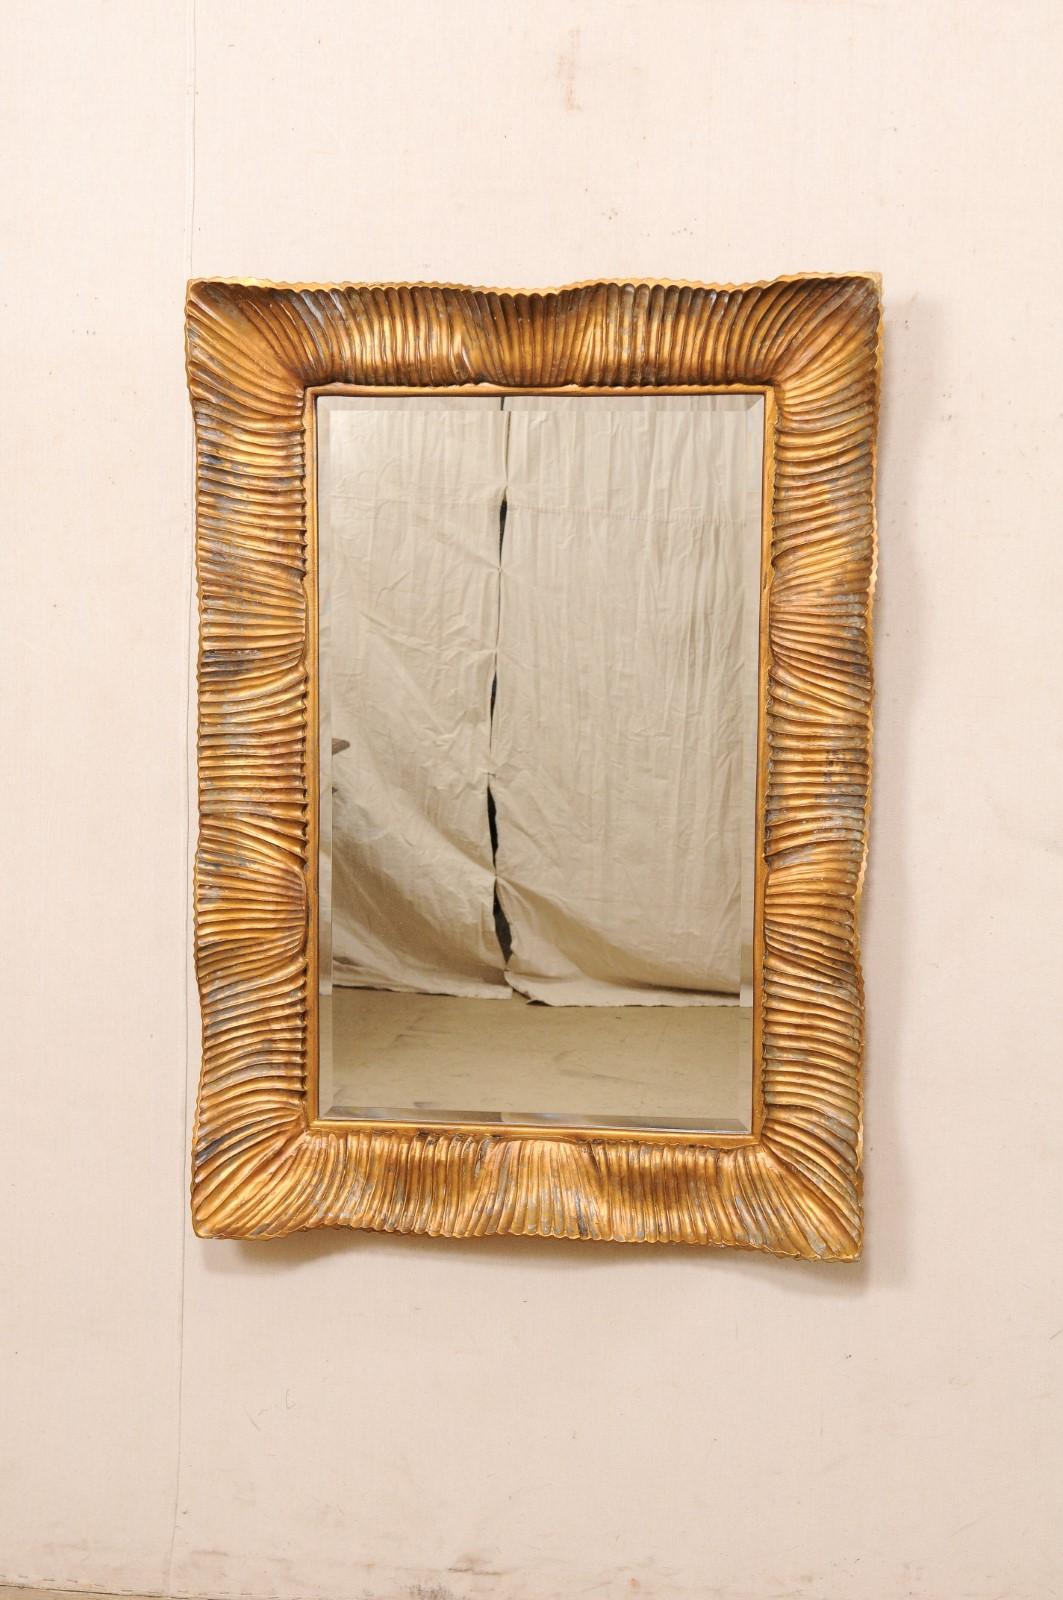 A vintage Hollywood Regency style mirror. This American-made Regency Moderne style mirror, constructed of composite resin with a copper/bronze finish, has a rectangular-shape with a delightful inwardly curling scalloped surround of undulating ridged